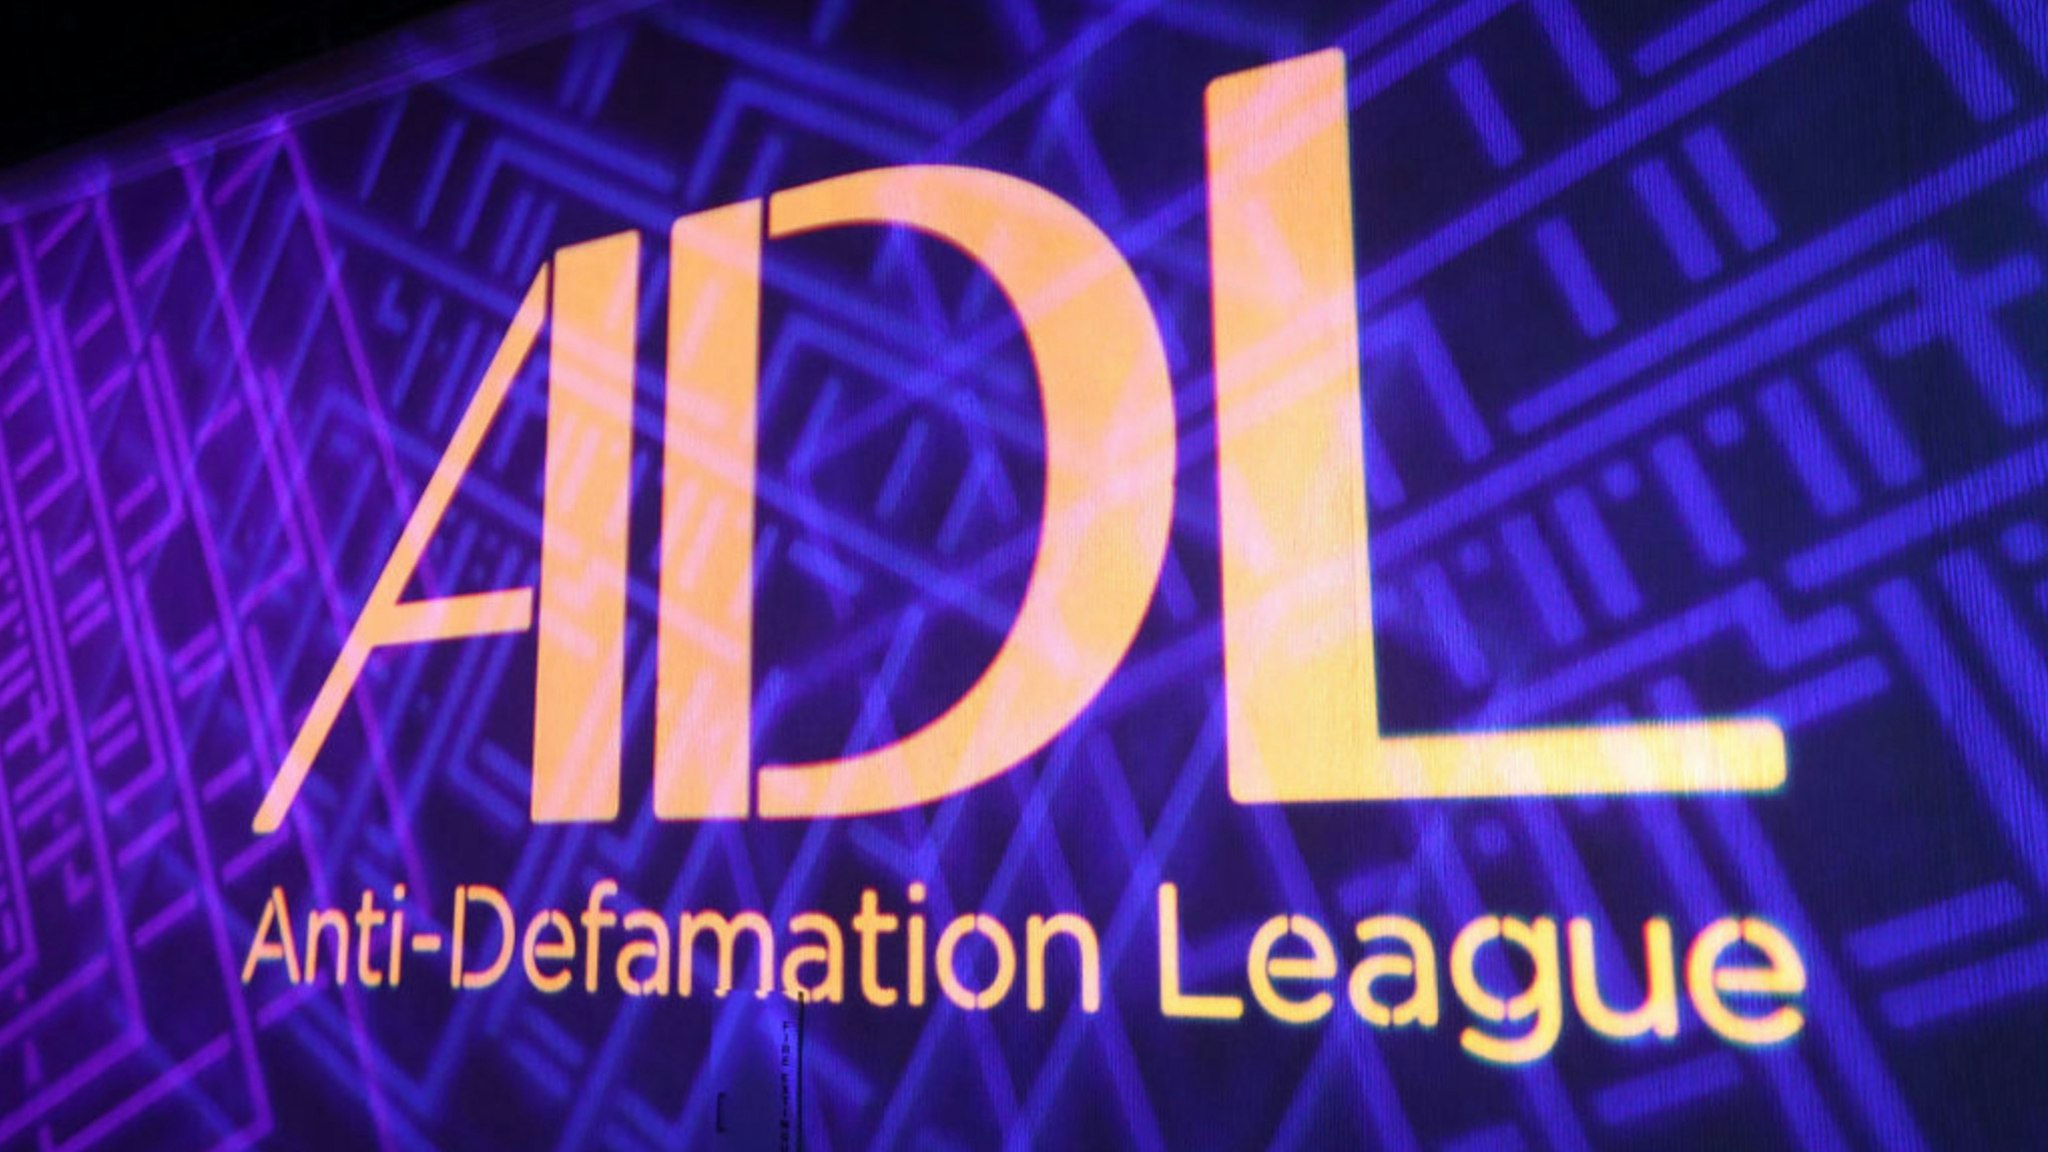 General view of atmosphere at Anti-Defamation League Entertainment Industry Dinner Honoring Bill Prady at The Beverly Hilton Hotel on May 24, 2017 in Beverly Hills, California.